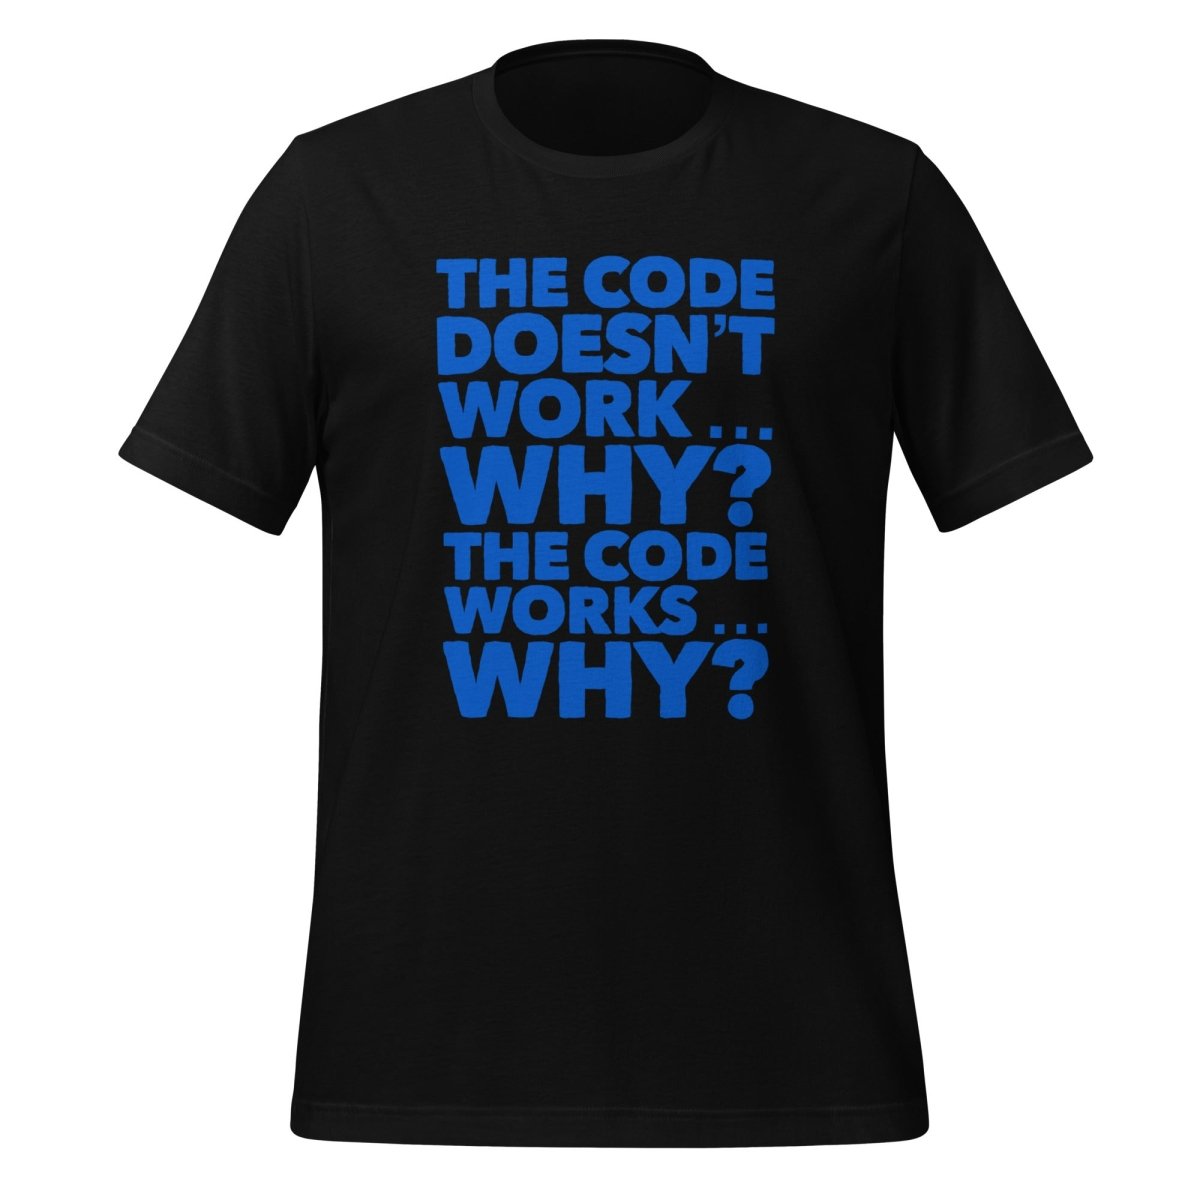 The code doesn't work, why? T - Shirt 2 (unisex) - Black - AI Store